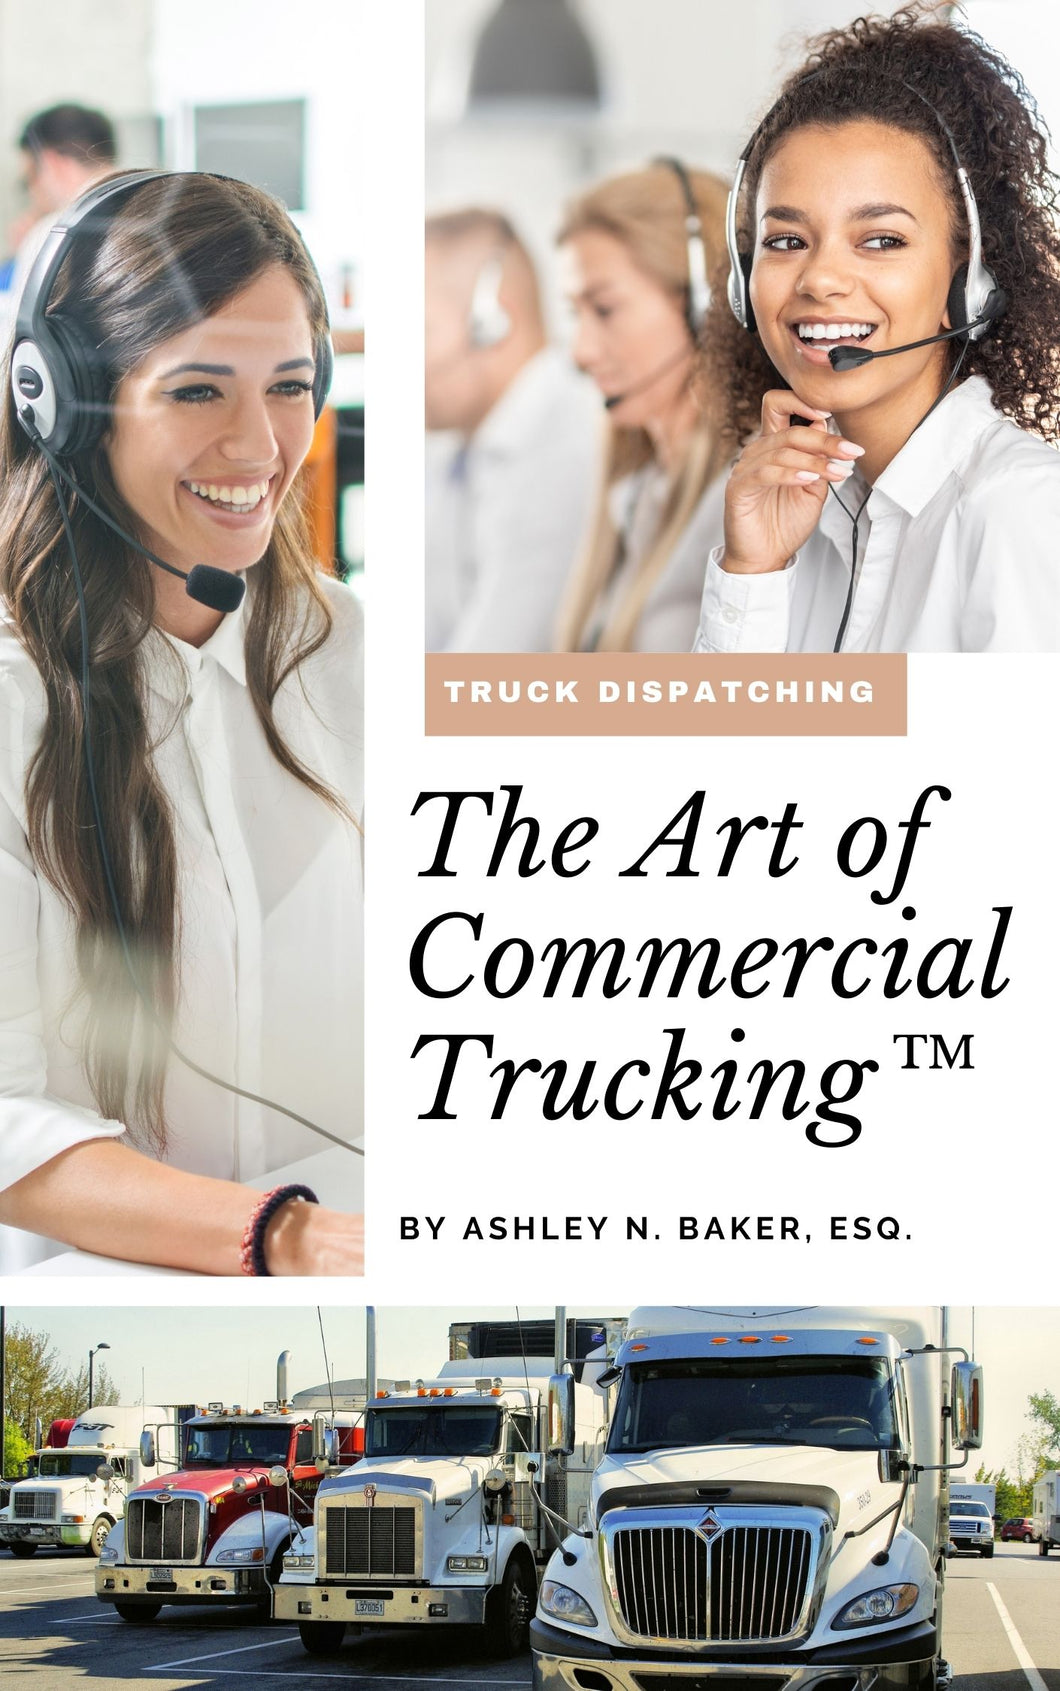 The Art of Commercial Trucking™: Truck Dispatching